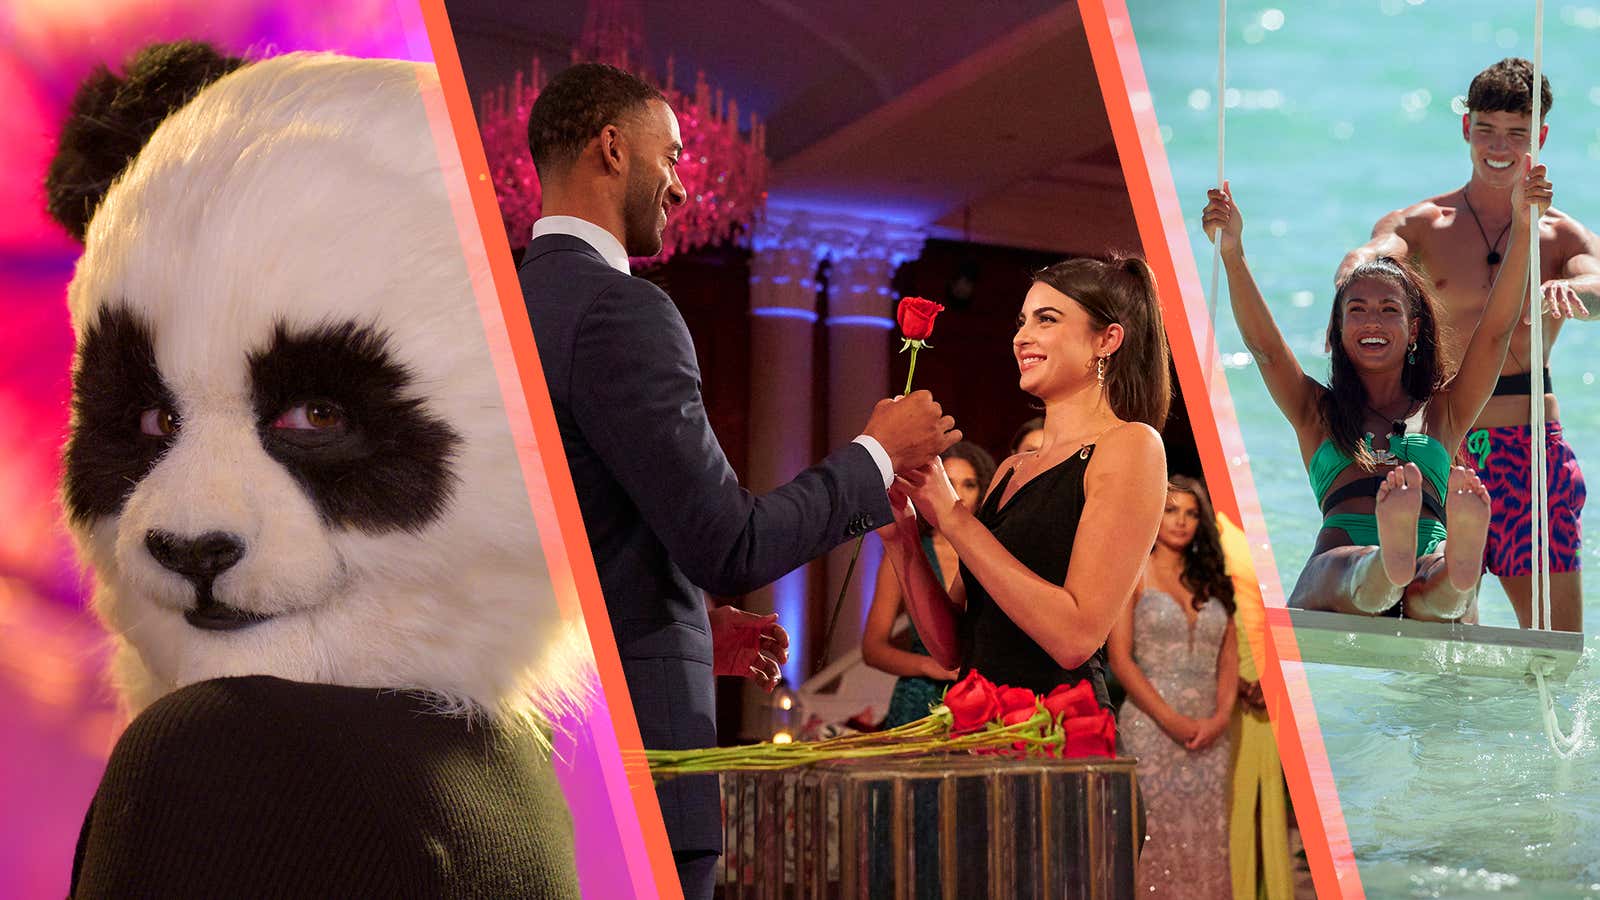 As The Bachelor stumbles, other reality dating shows are heating up